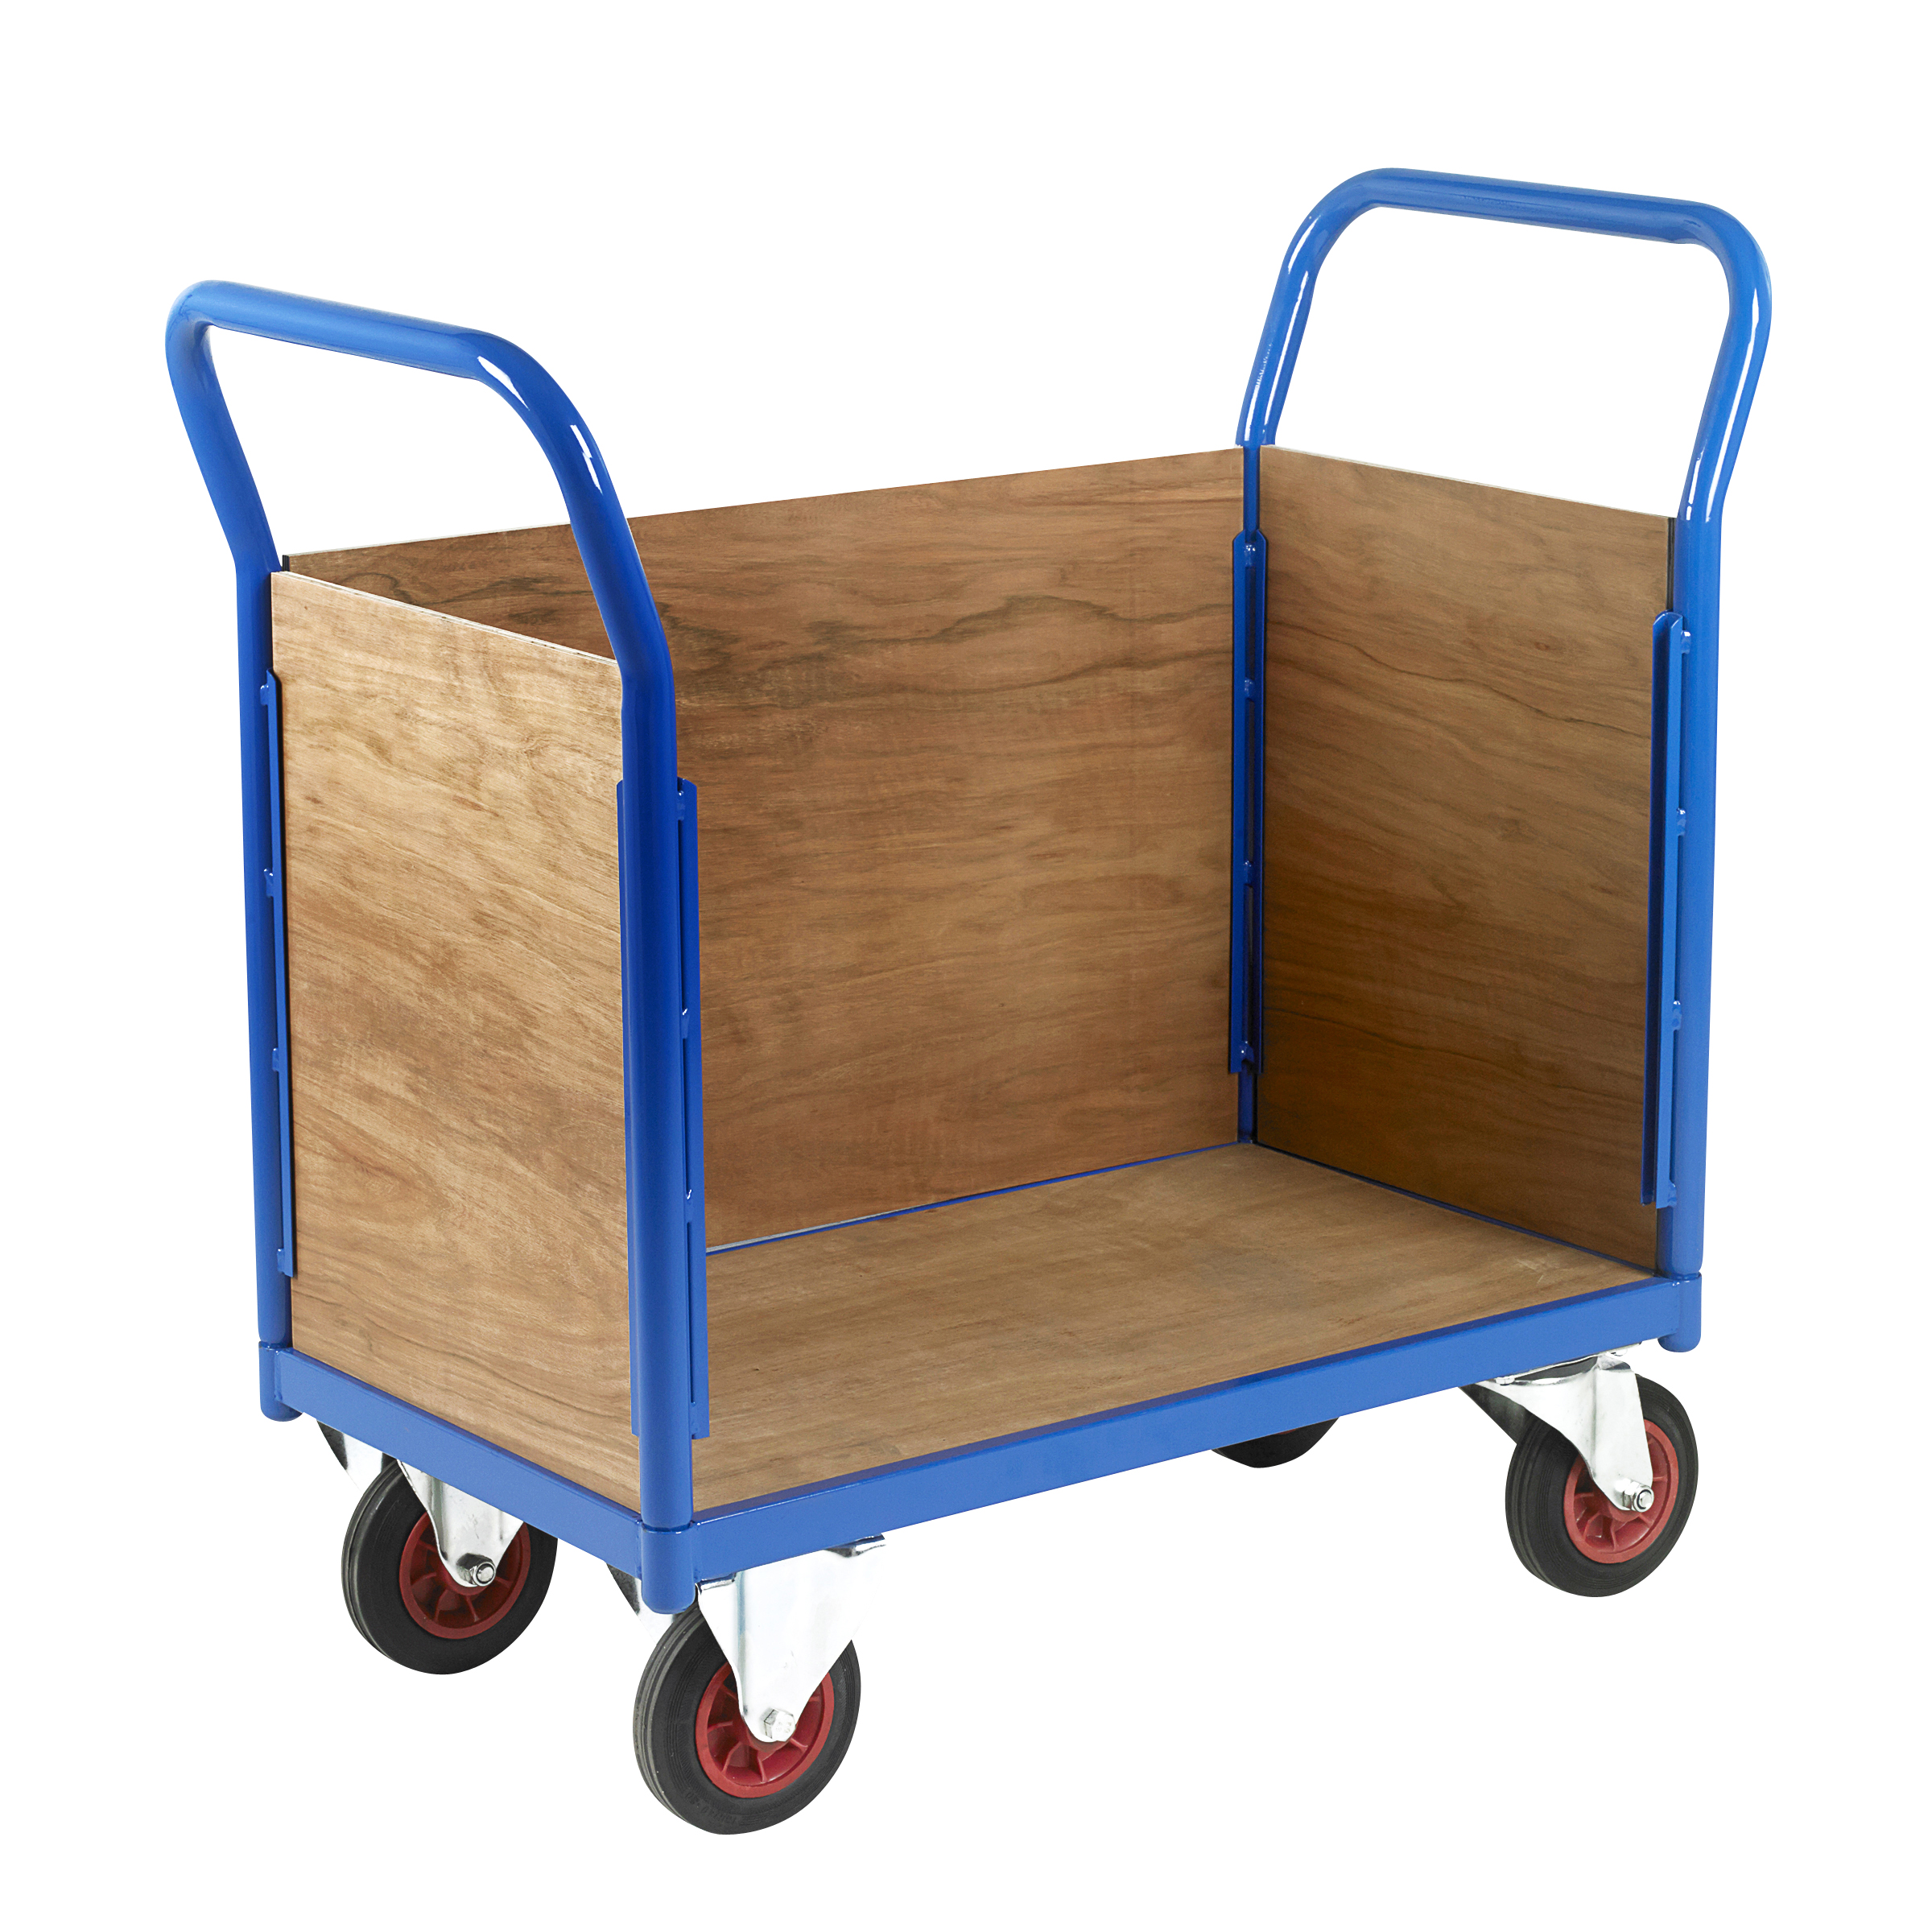 Platform Truck - 900 Series with Timber Panels